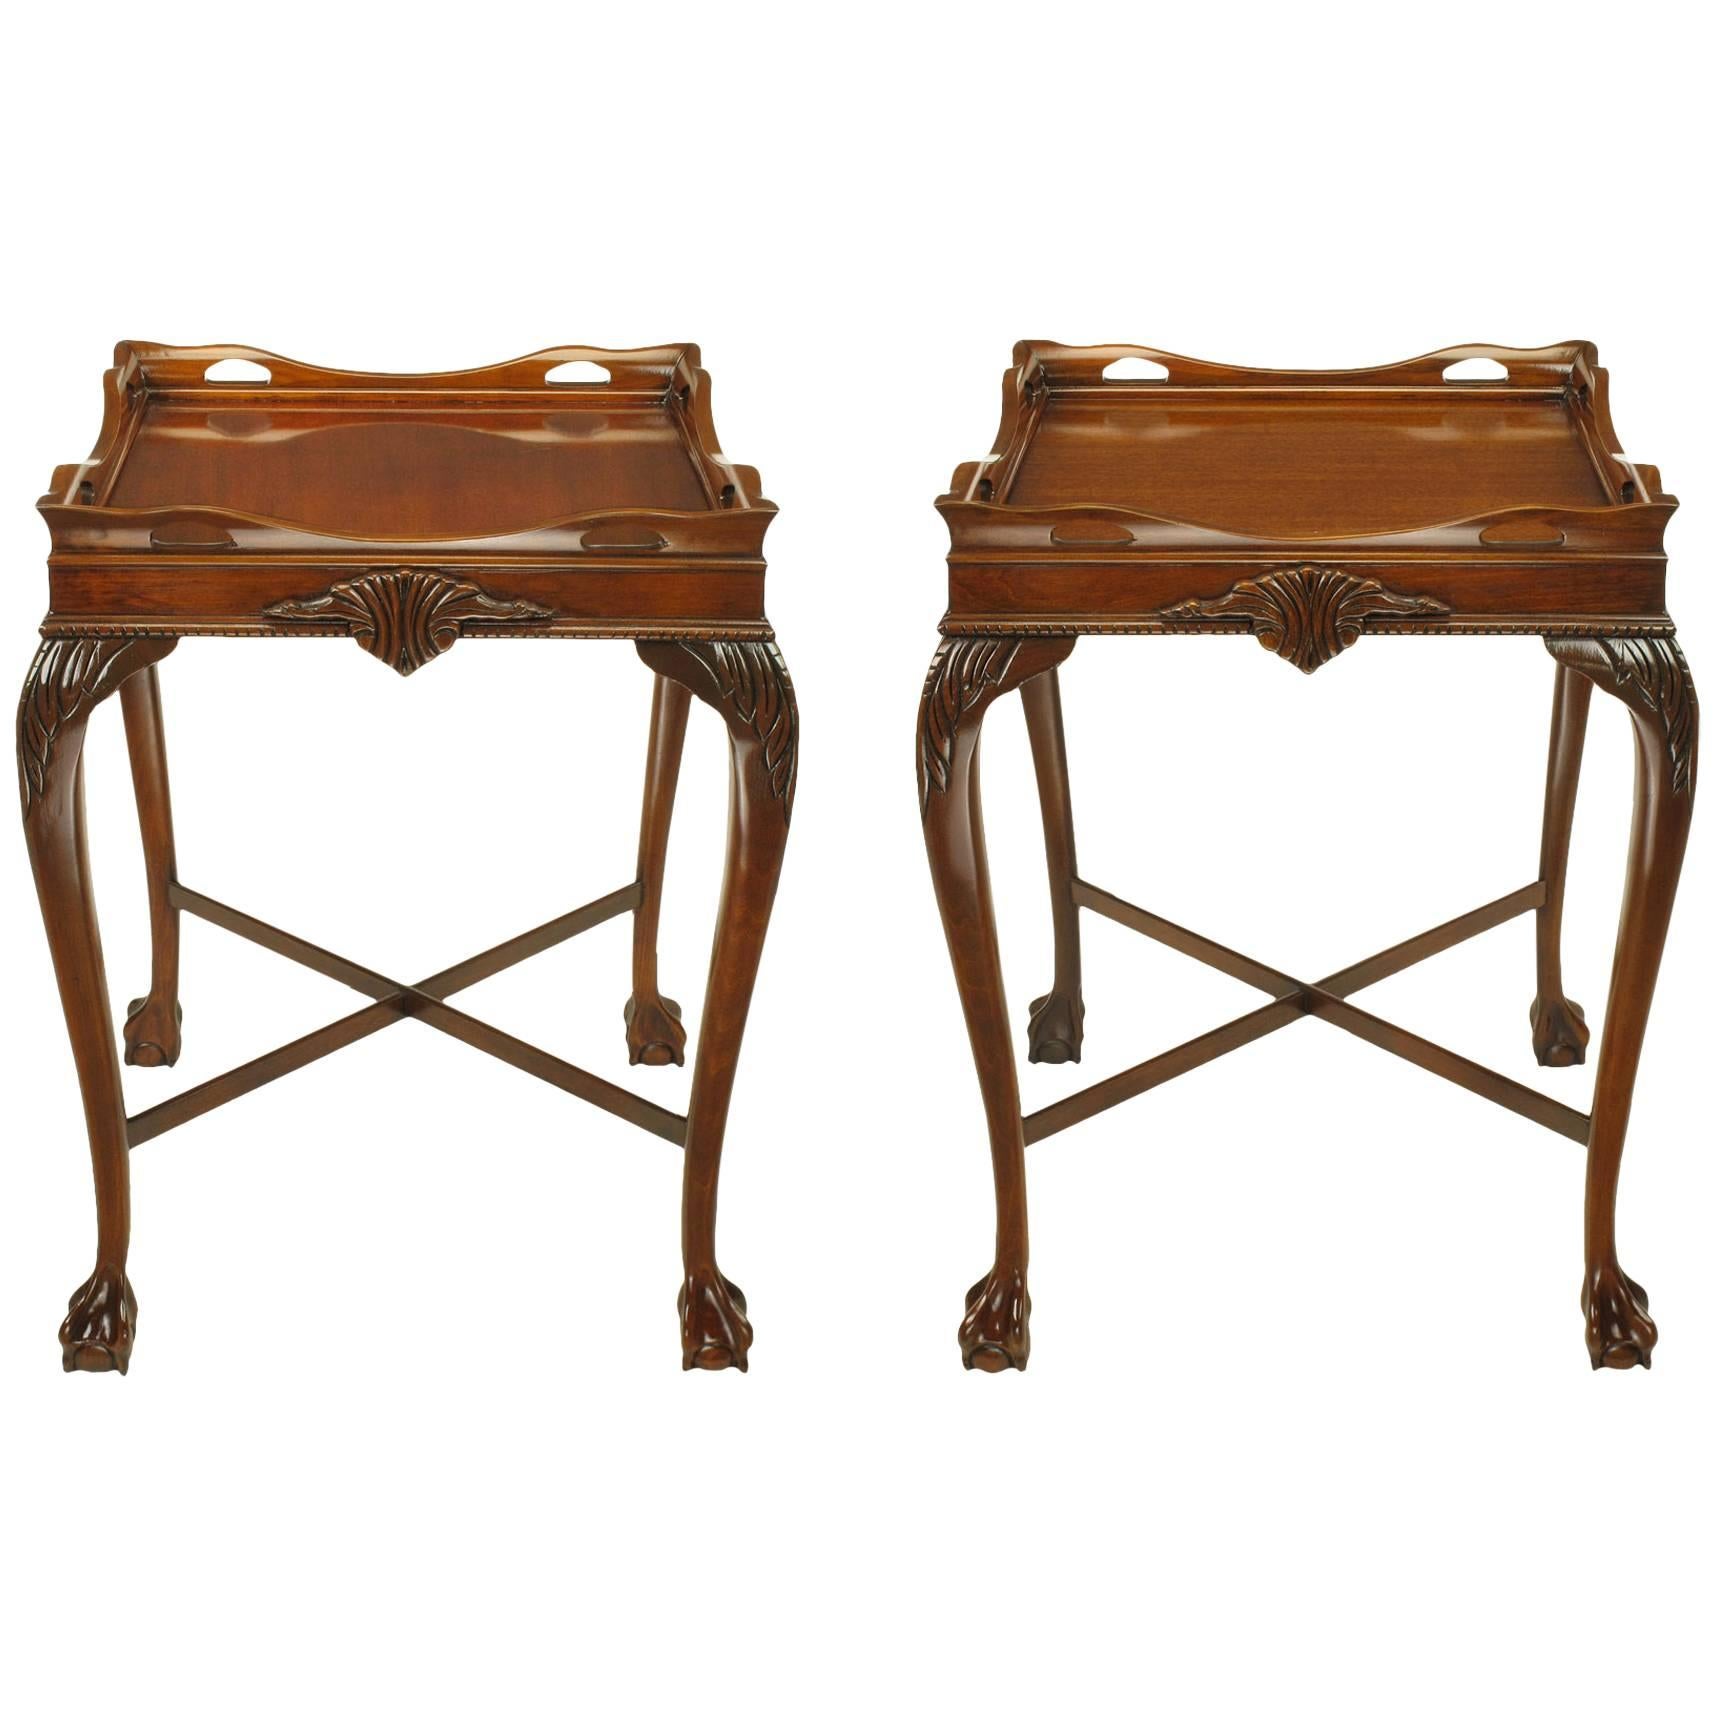 Pair of Mahogany Ball and Claw Footed George II Style End Tables